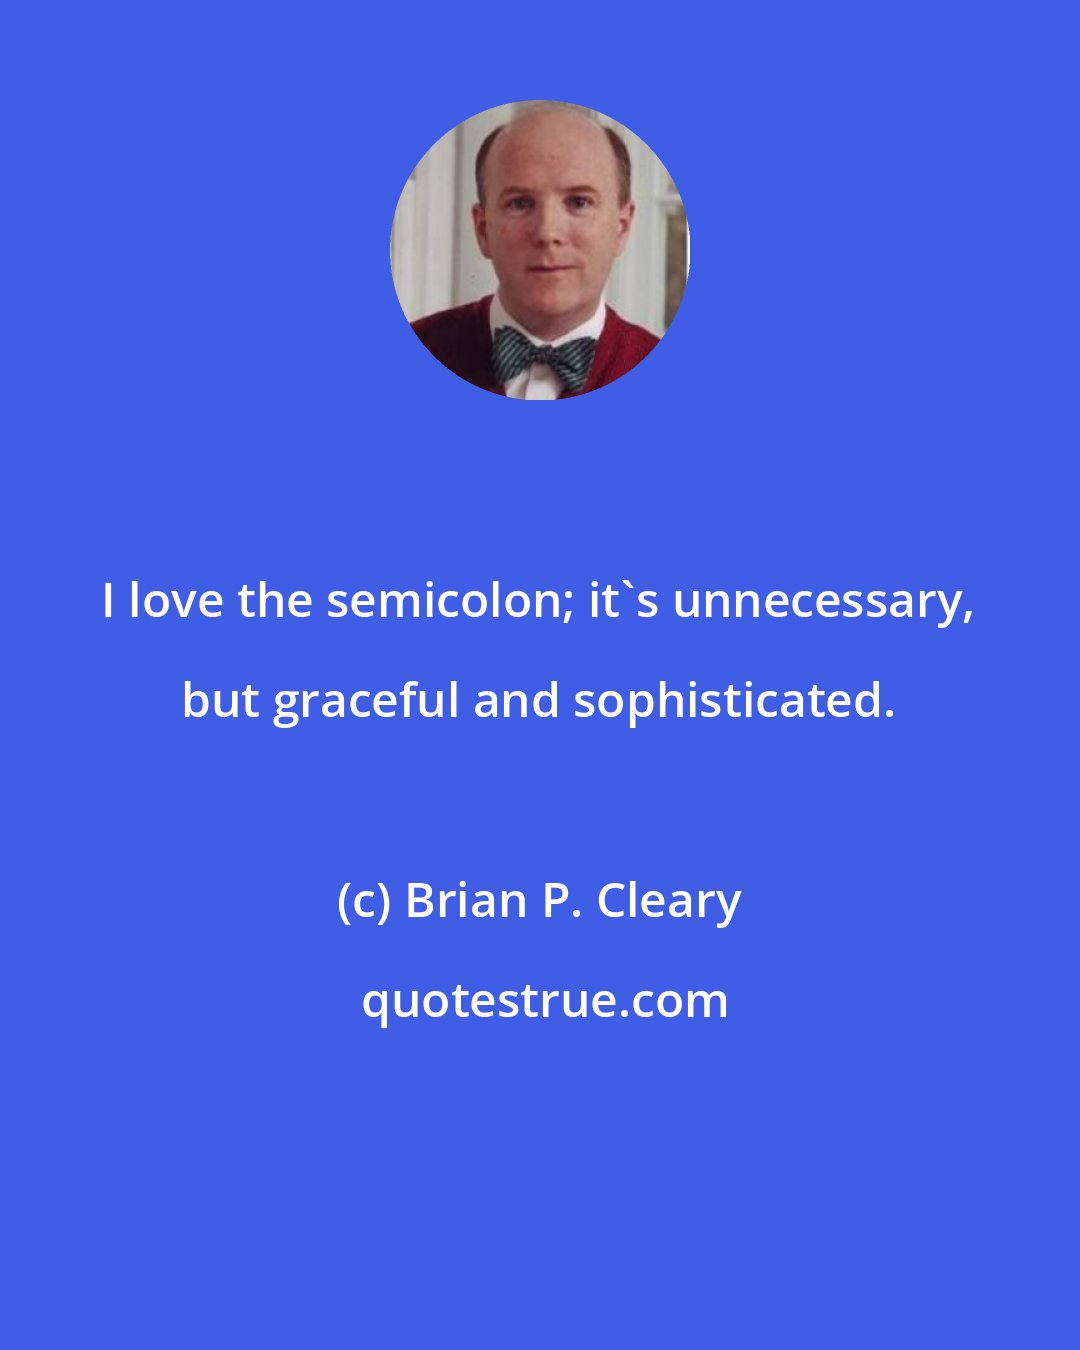 Brian P. Cleary: I love the semicolon; it's unnecessary, but graceful and sophisticated.